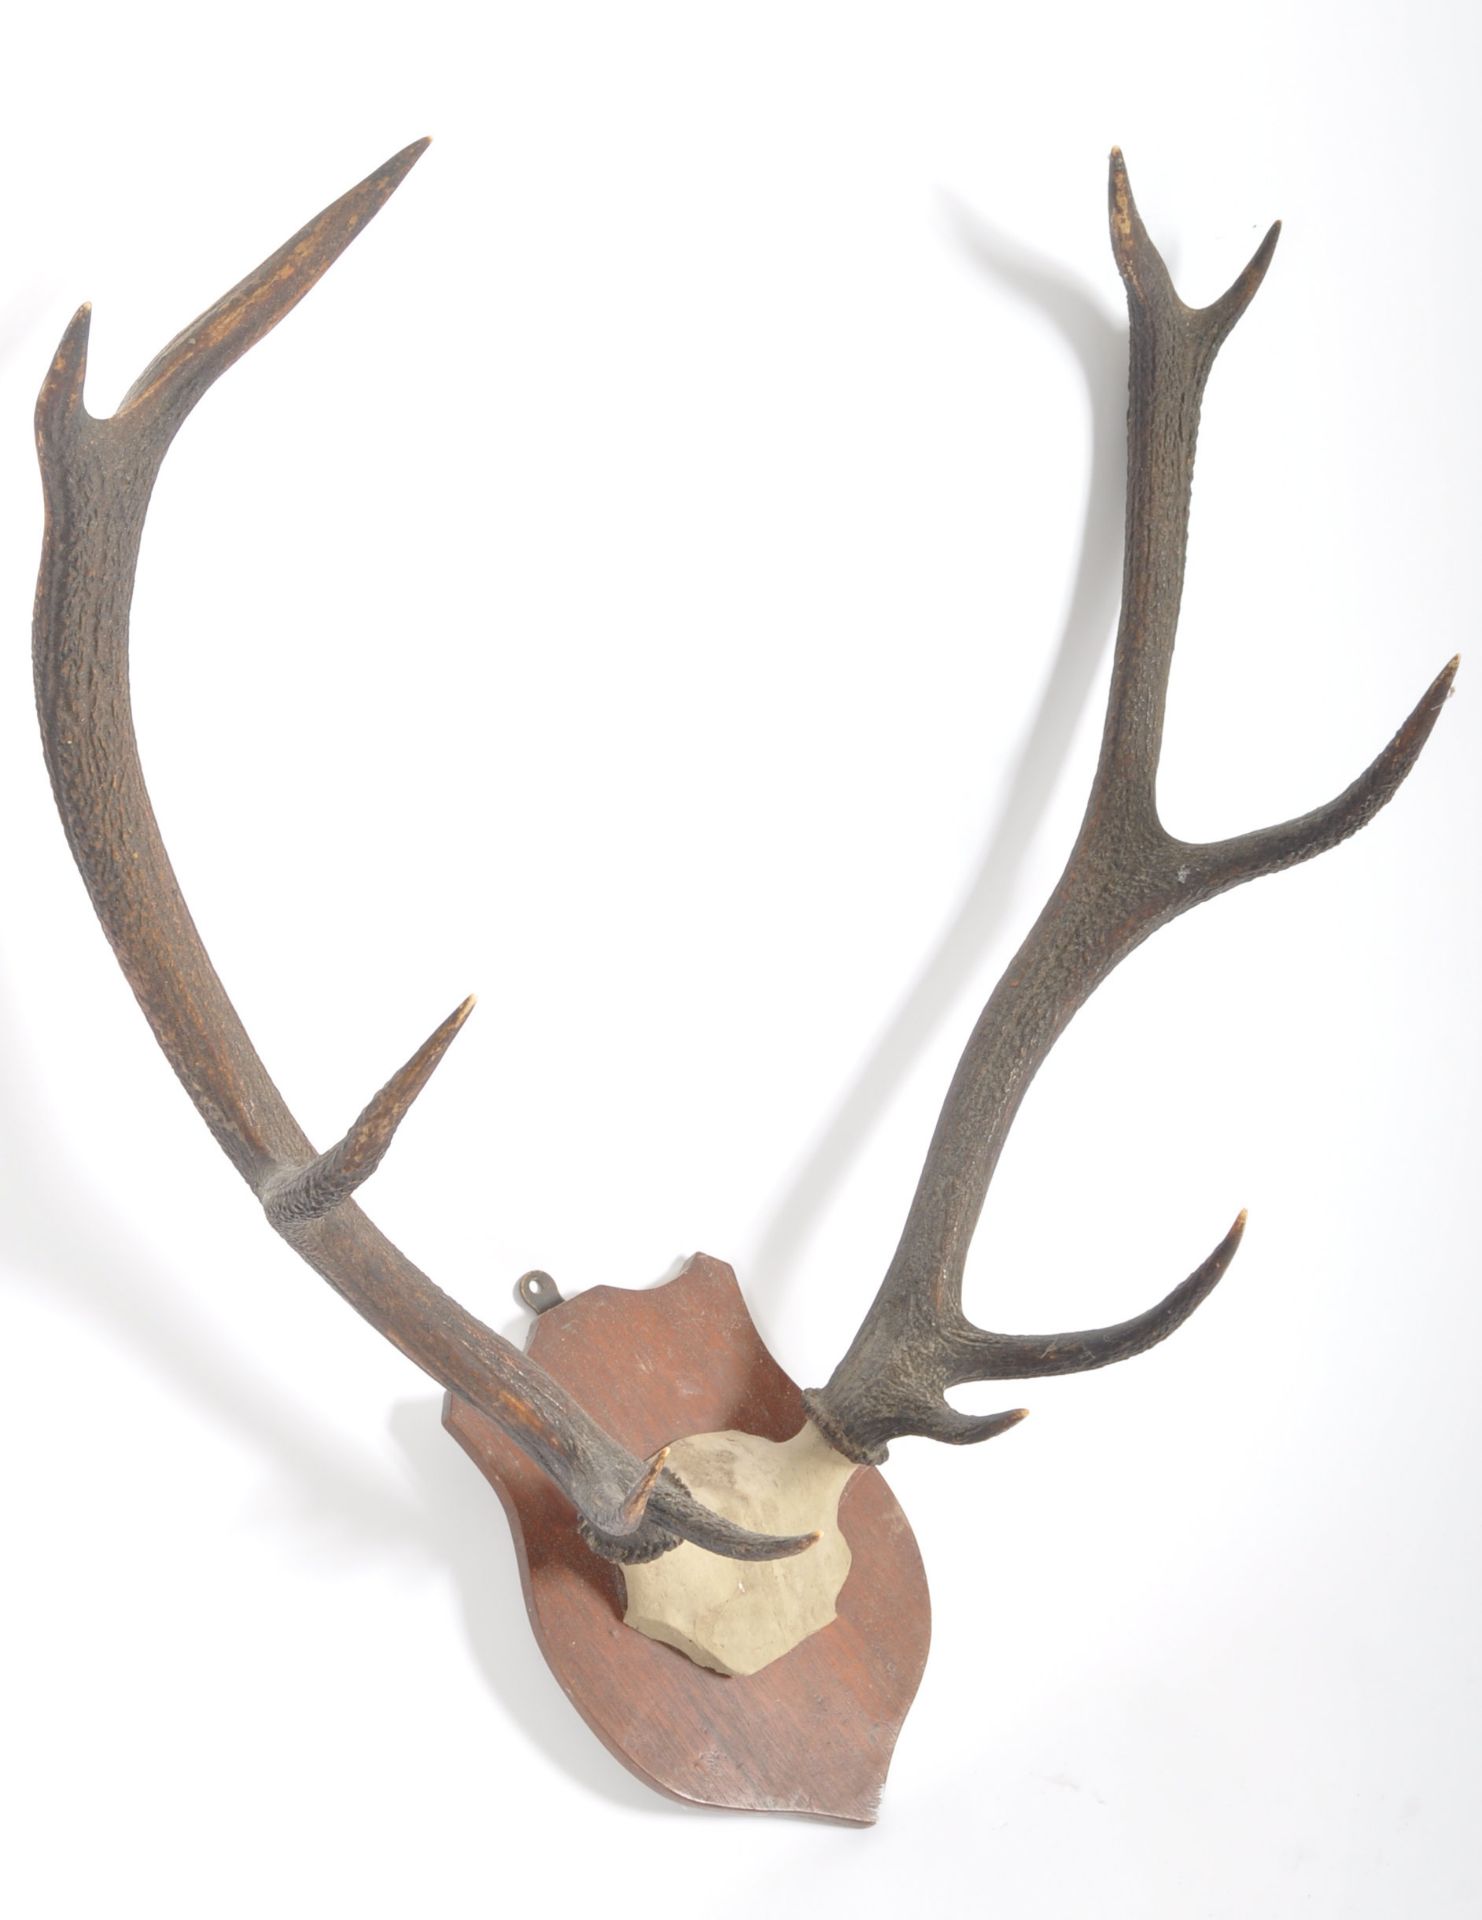 TAXIDERMY & NATURAL HISTORY - SET OF STAG ANTLER HORNS - Image 4 of 5